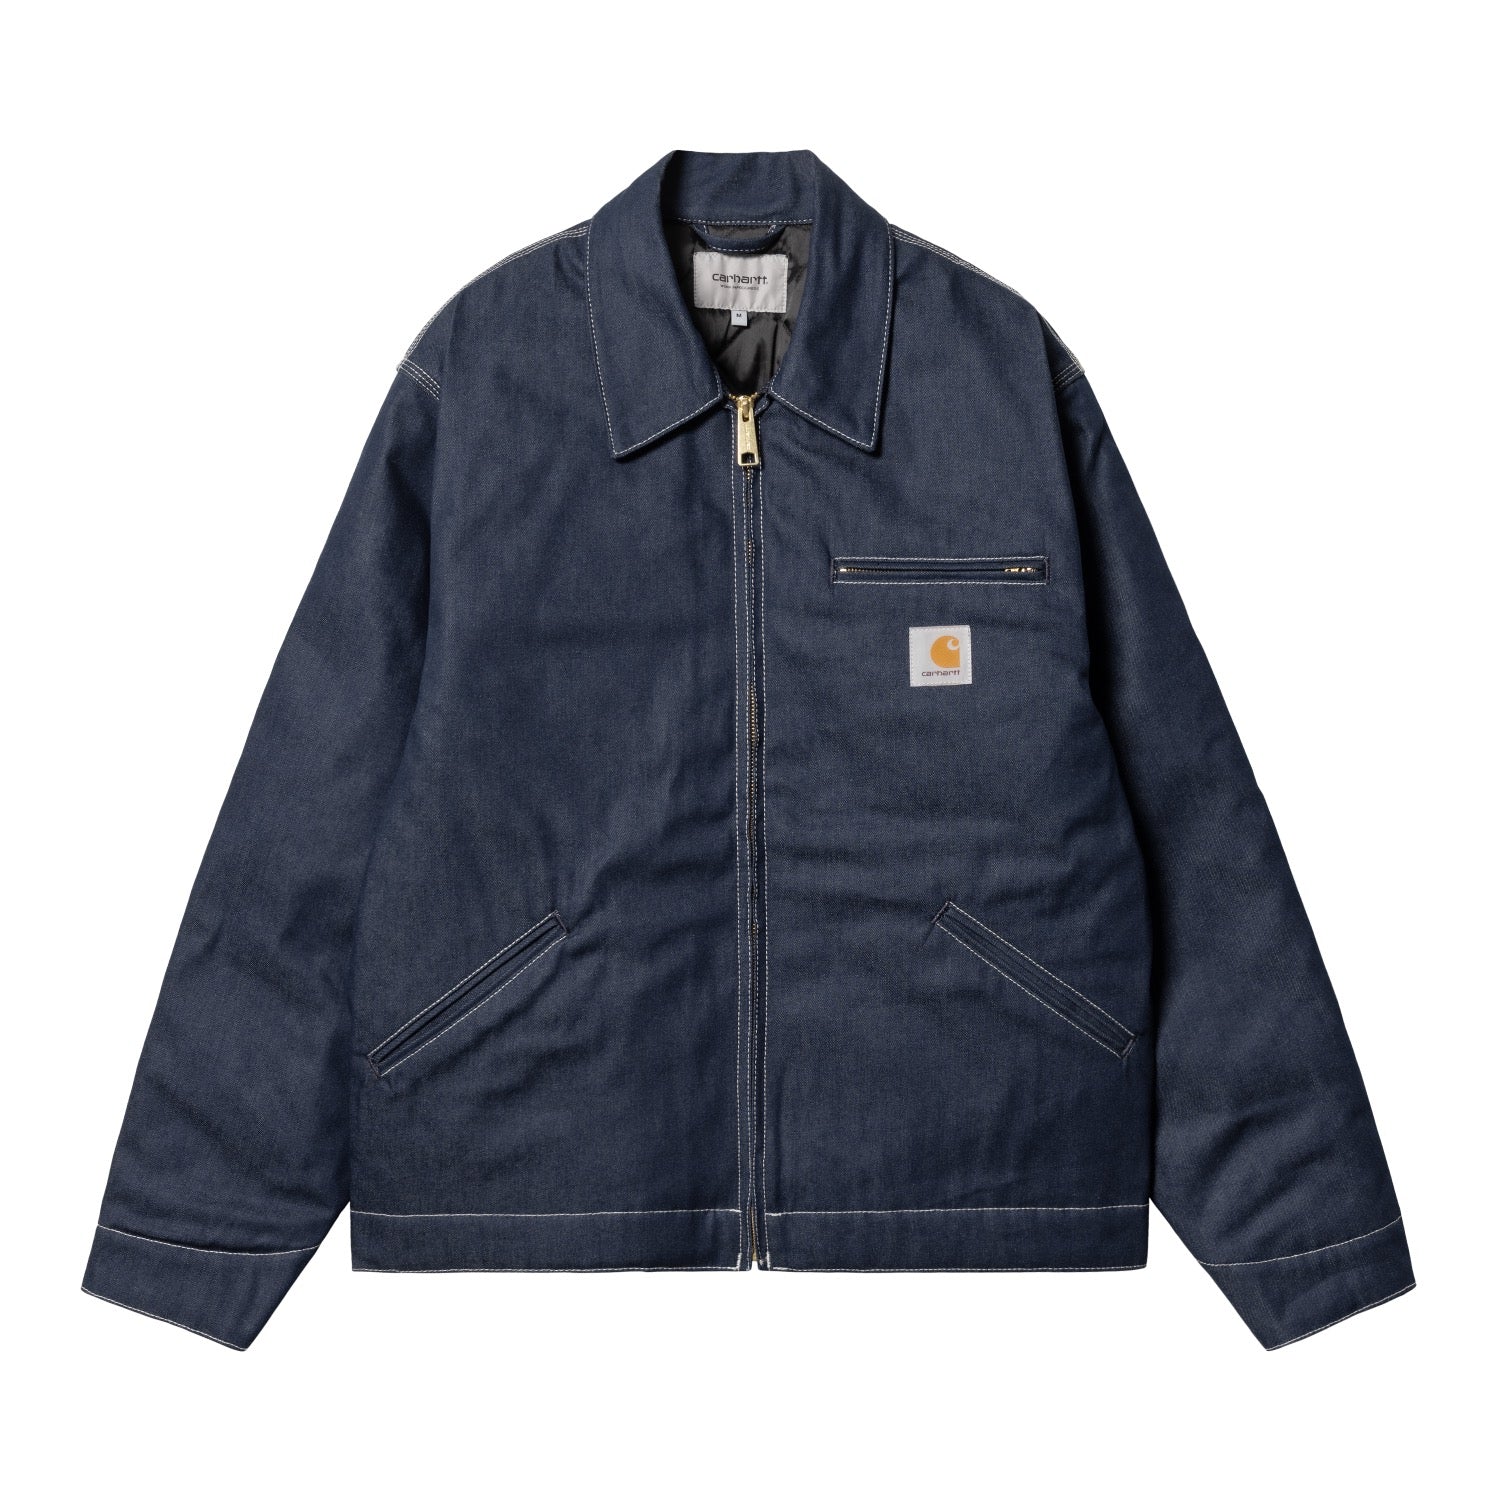 【Carhartt】DetroitJacket カーハートデトロイトジャケットace_used